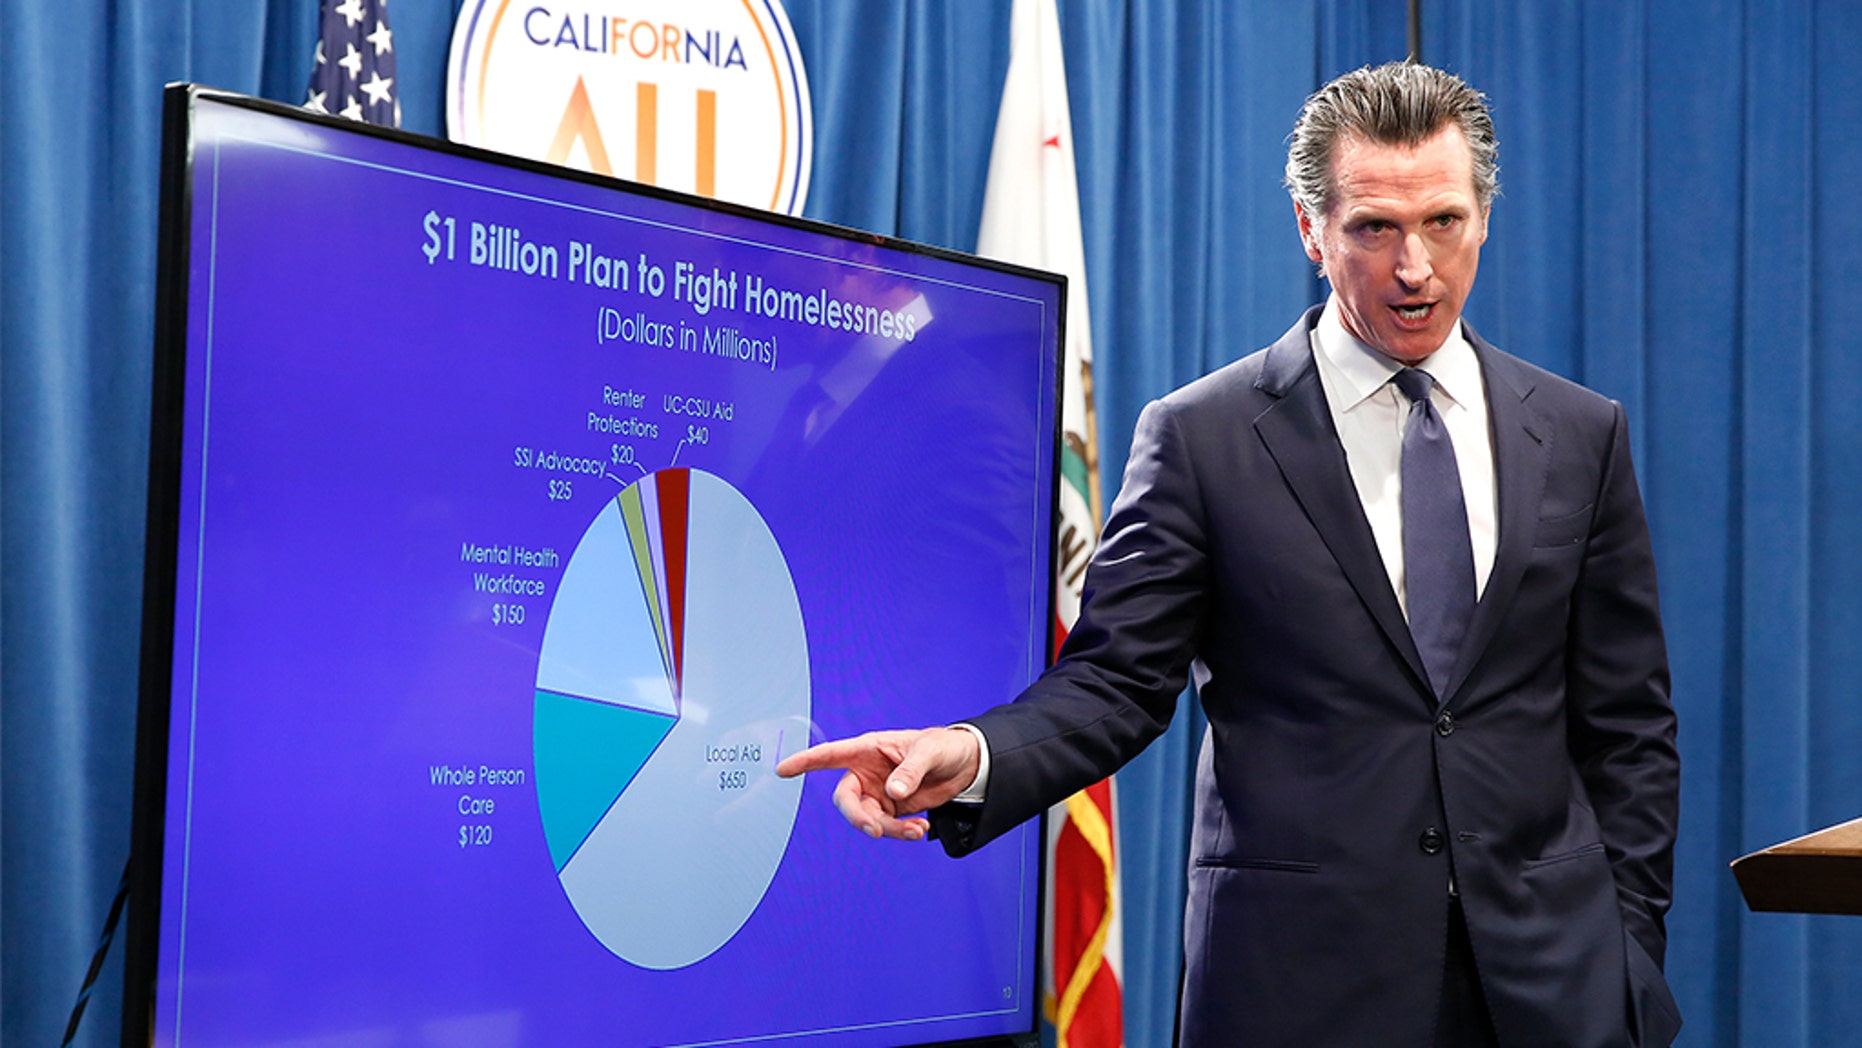 The spending plan was adopted with separate votes by the State Assembly and the Senate. He is now back to Governor Gavin Newsom, who is expected to sign it in the coming days. (AP Photo / Rich Pedroncelli, File)